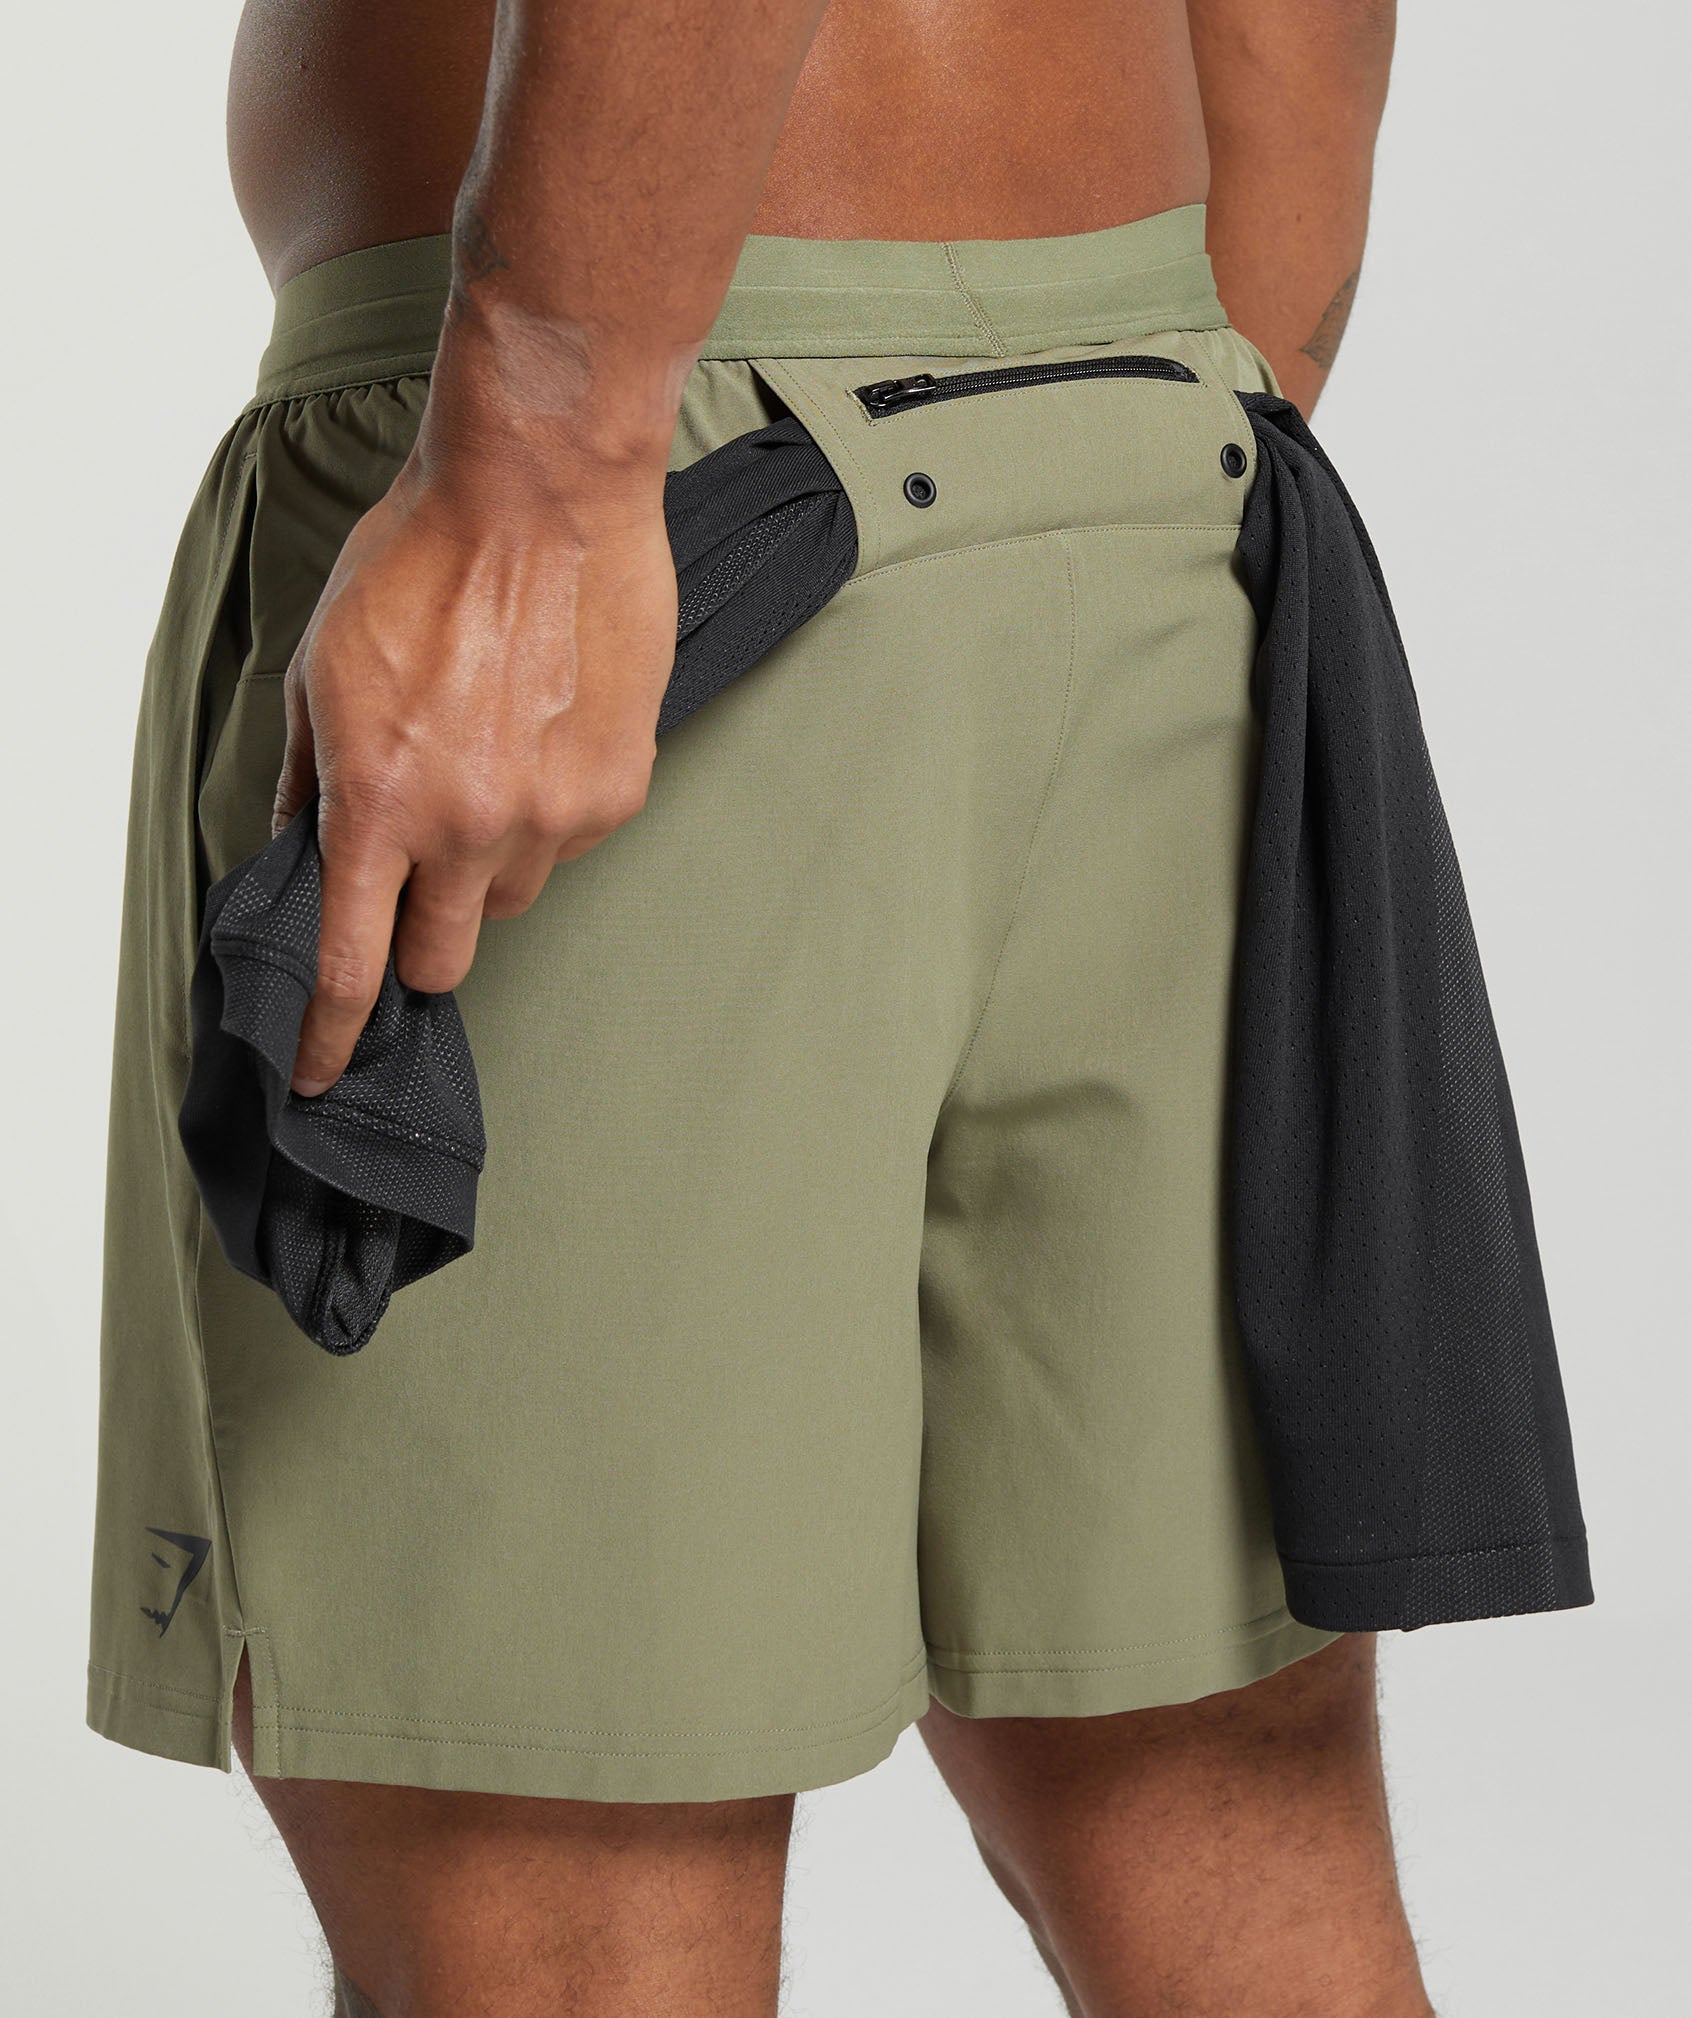 Land to Water 6" Shorts in Utility Green - view 6